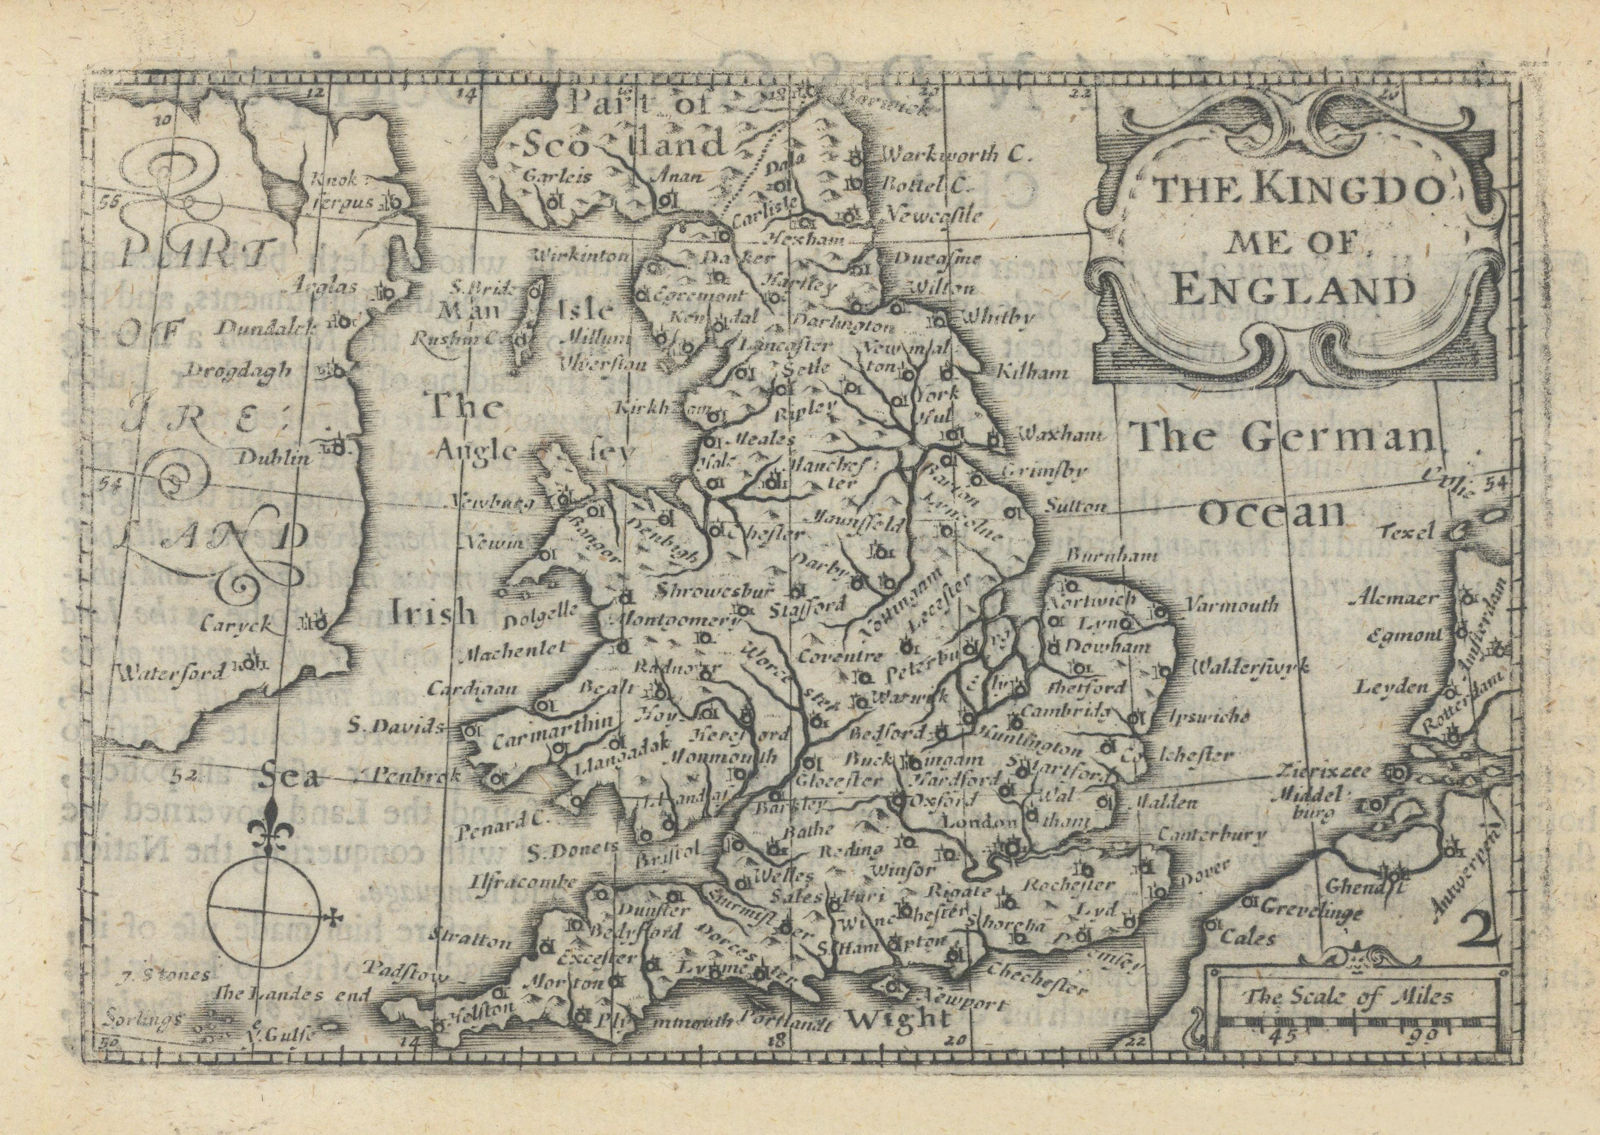 Associate Product The Kingdome of England by van den Keere. "Speed miniature" 1627 old map